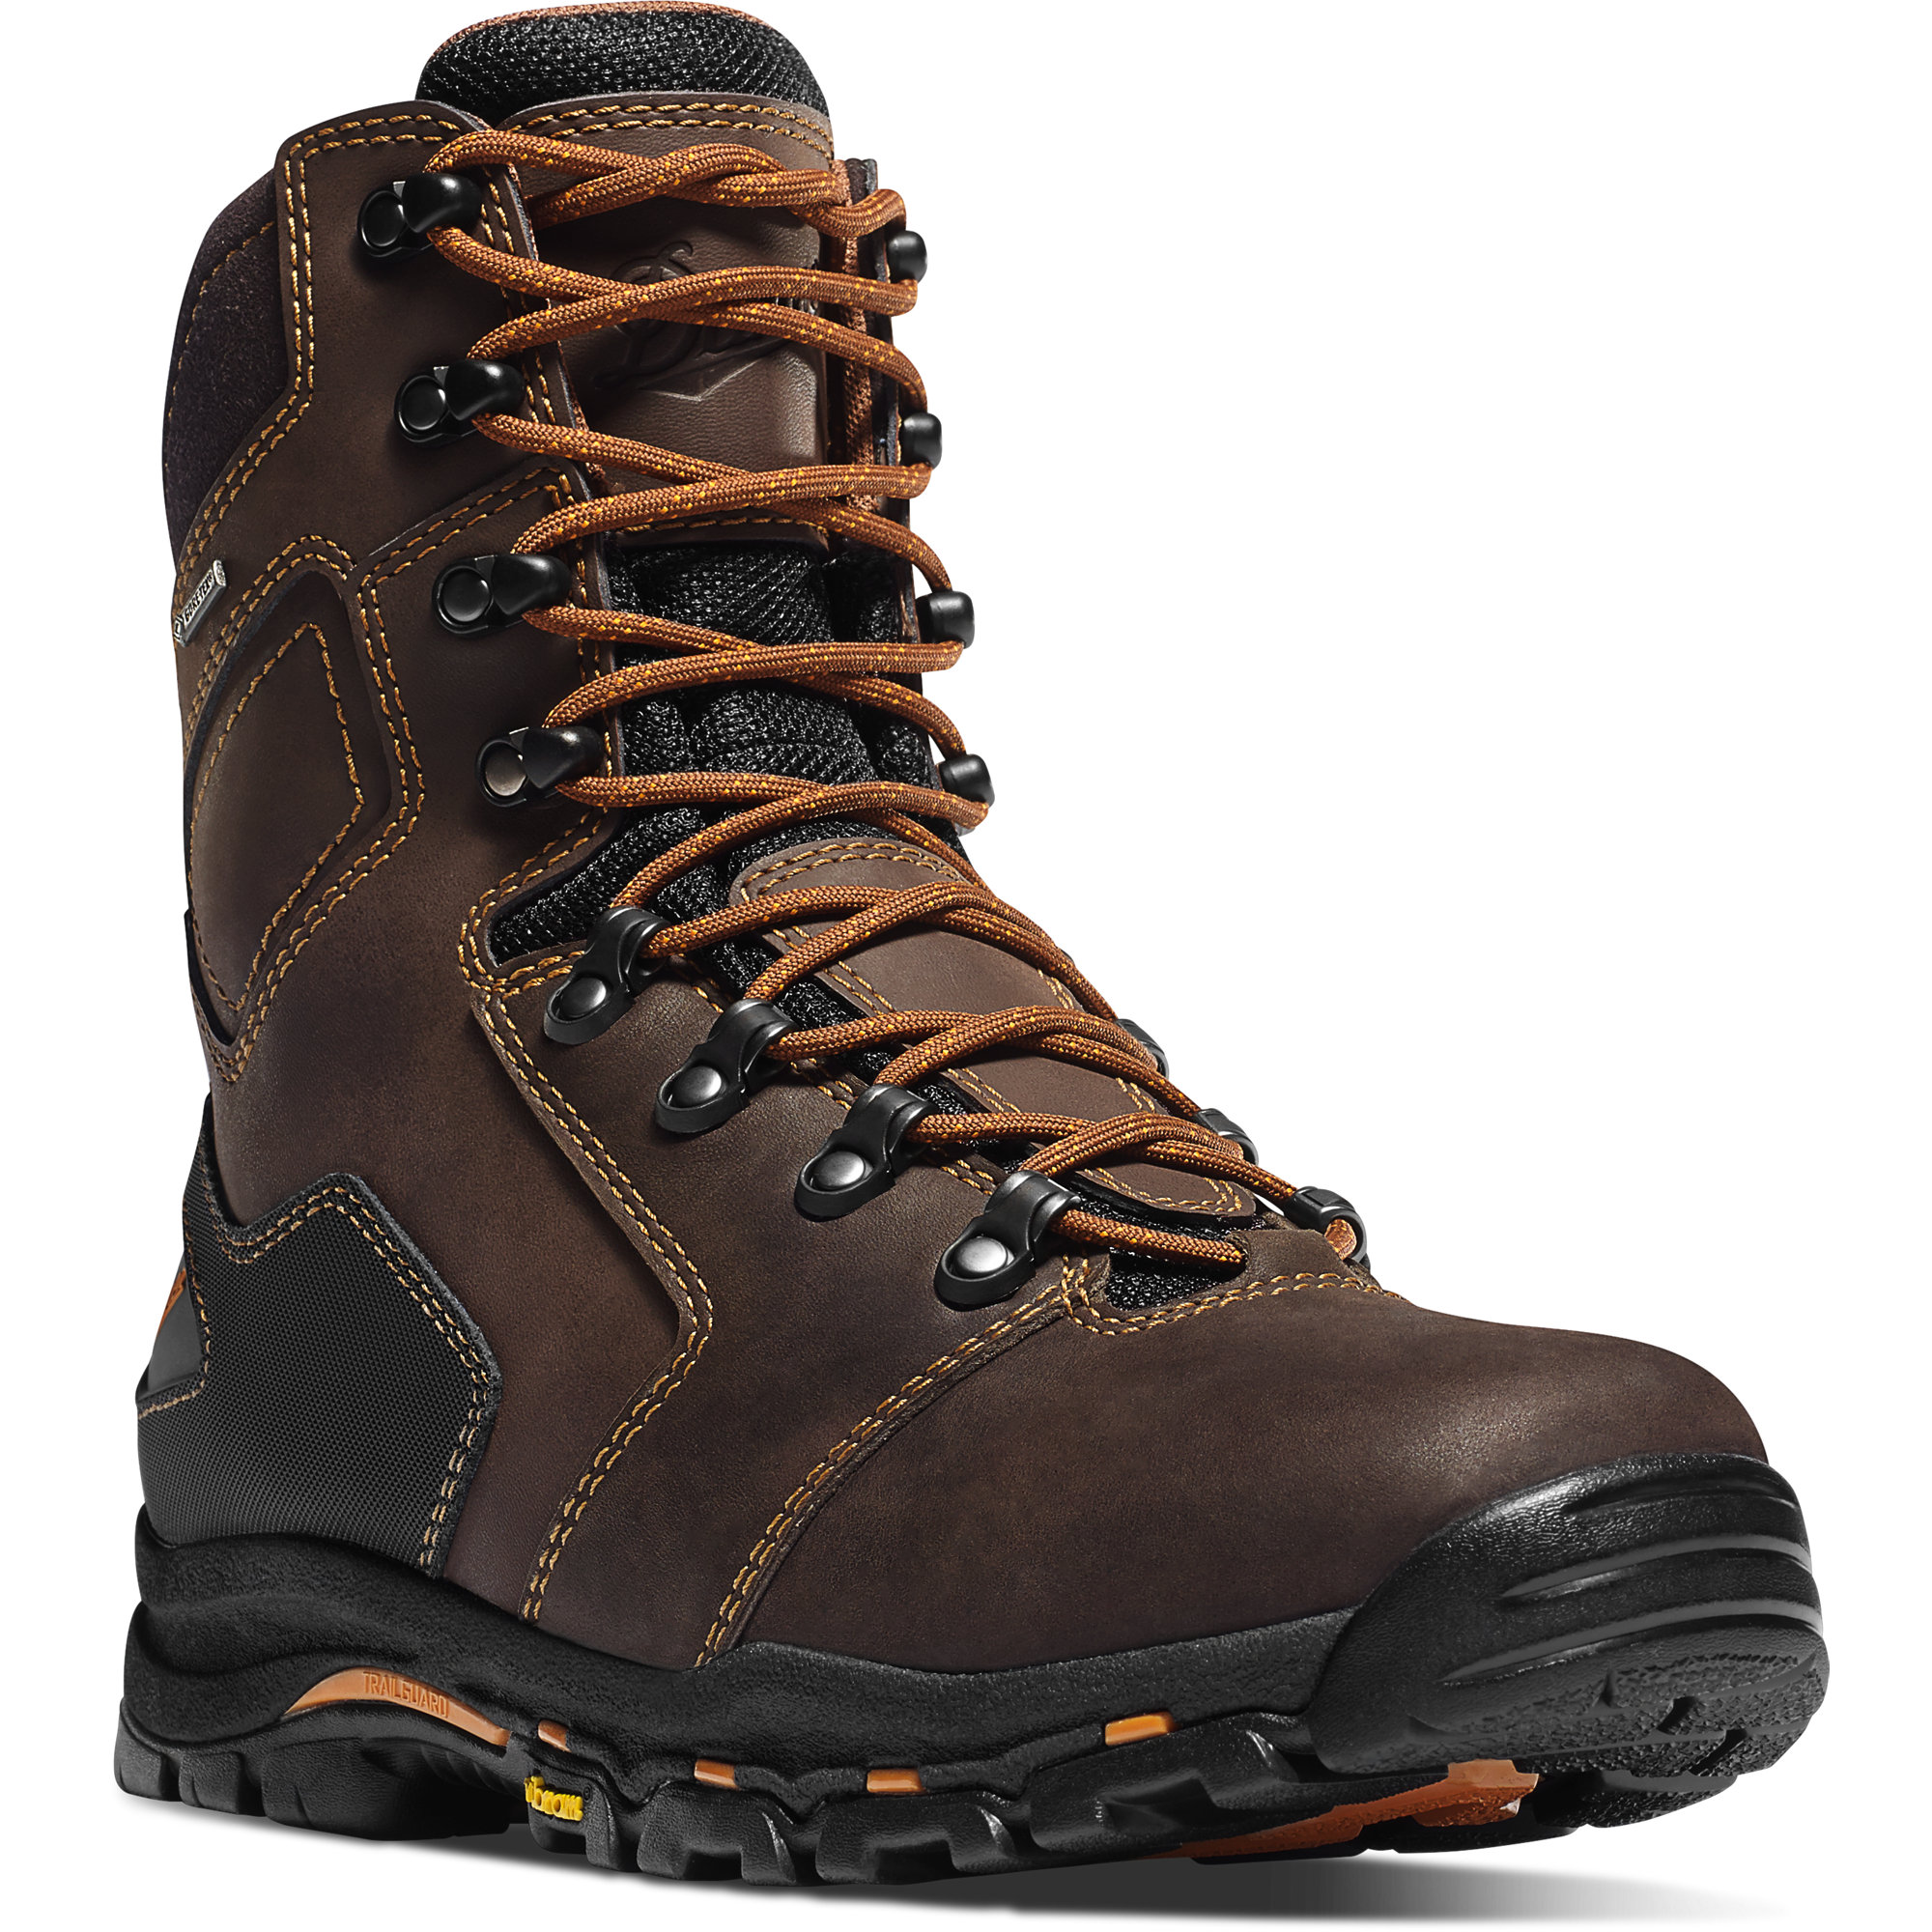 LaCrosse Men's Vicious 8 Inch Work Boots with Composite Toe (Brown)LaCrosse Men's Vicious 8 Inch Work Boots with Composite Toe (Brown) from GME Supply